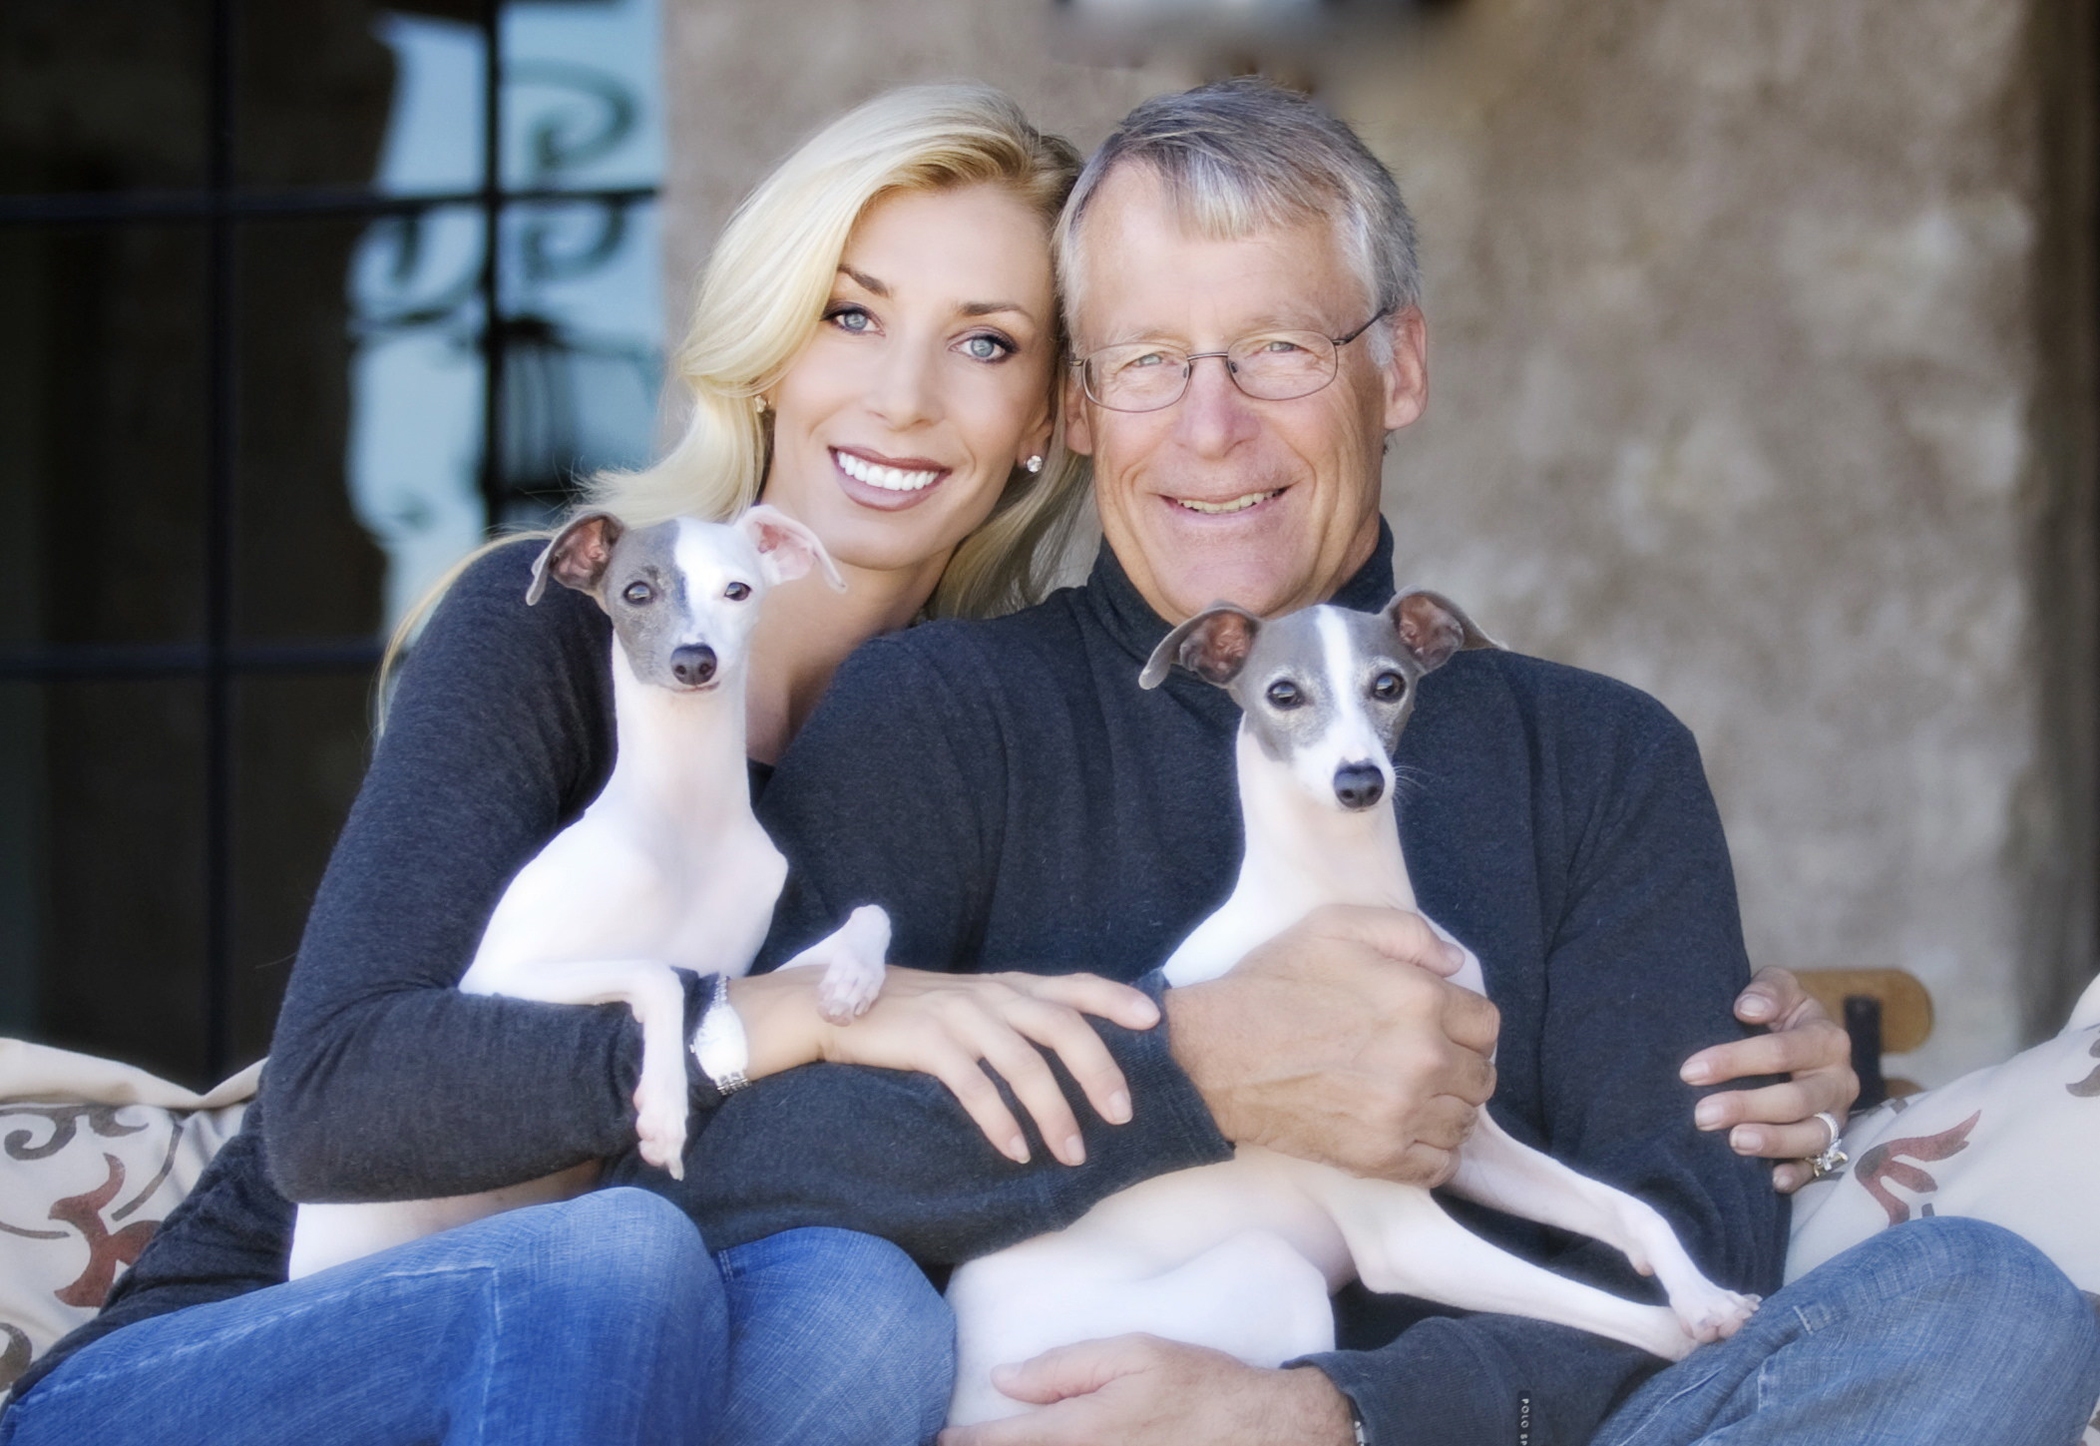 Rob Walton, the retired chairman of the board of Walmart, and his wife Melani, donated $5 million to help fund the Arizona Humane Society's 72,000-square-foot campus and medical complex under construction in Phoenix. (Allison Jones/Arizona Humane Society)<br>